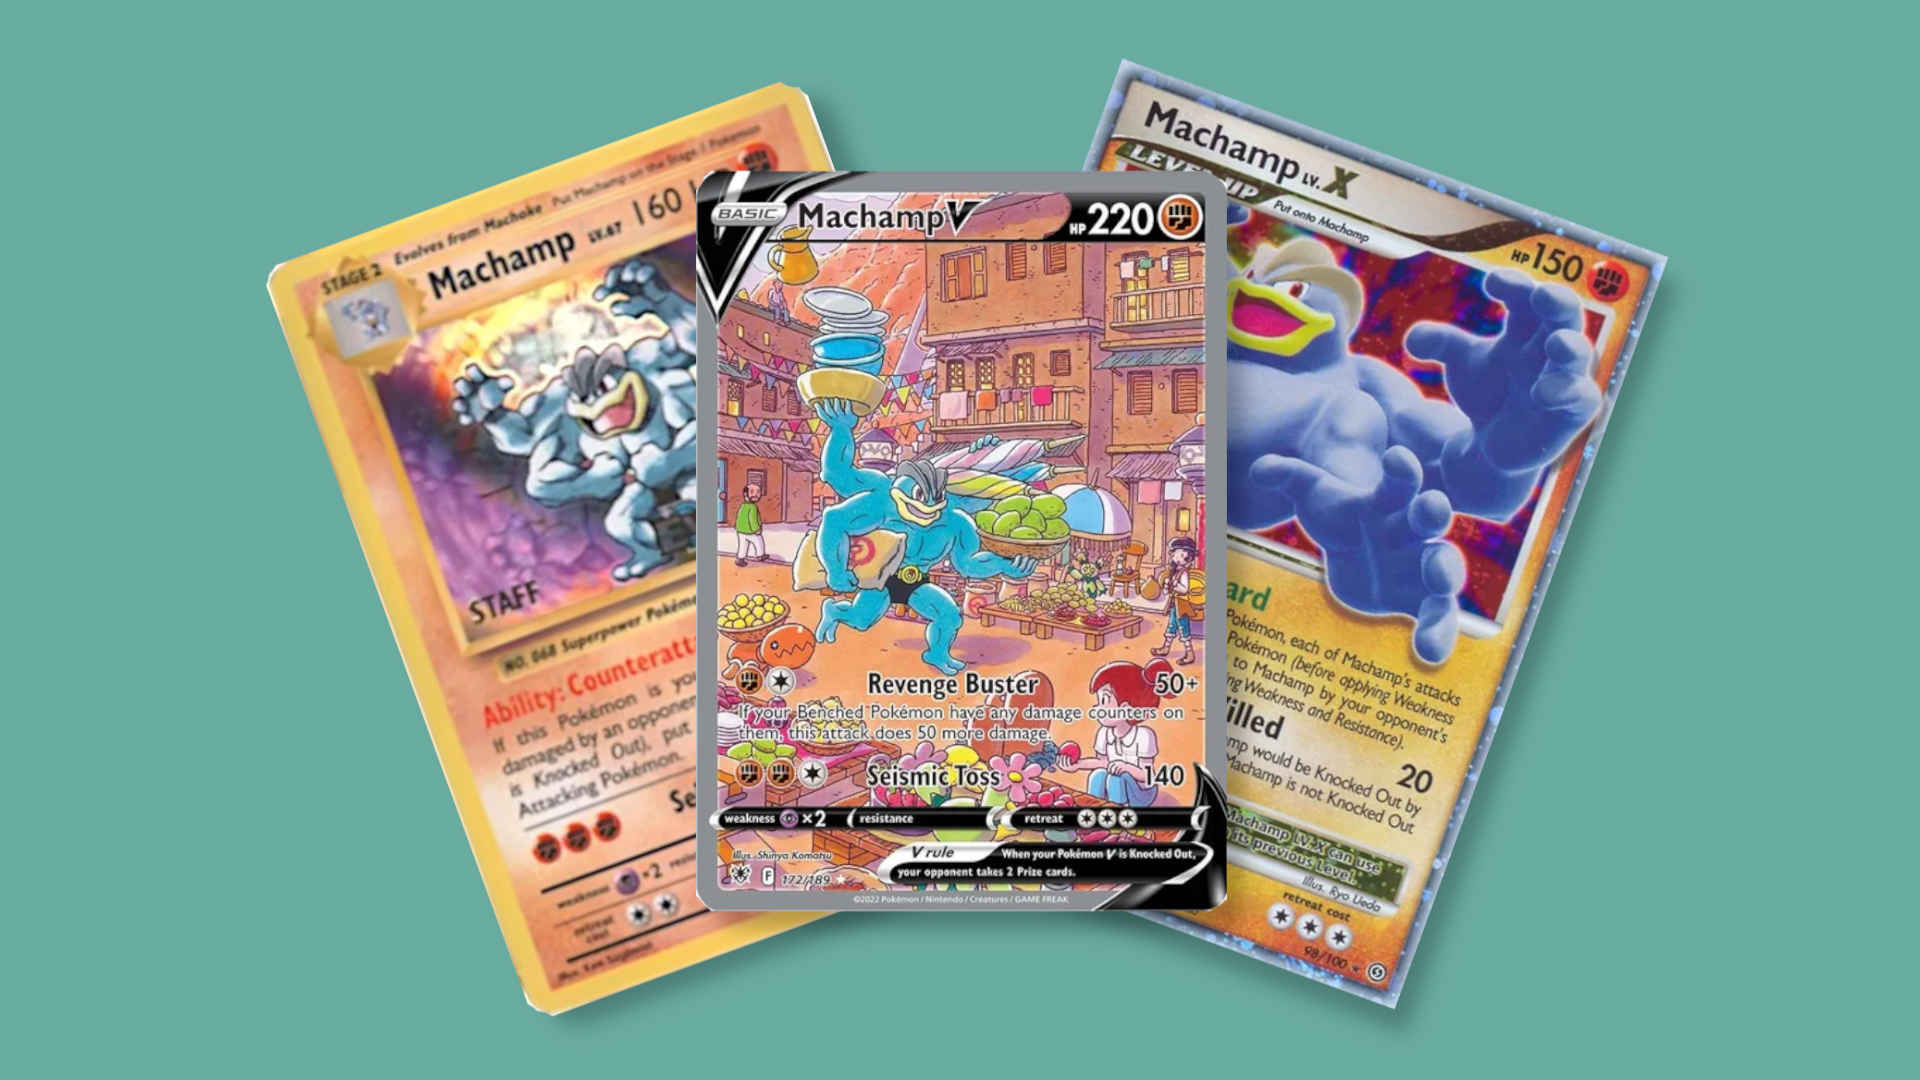 Most Valuable Machamp Cards